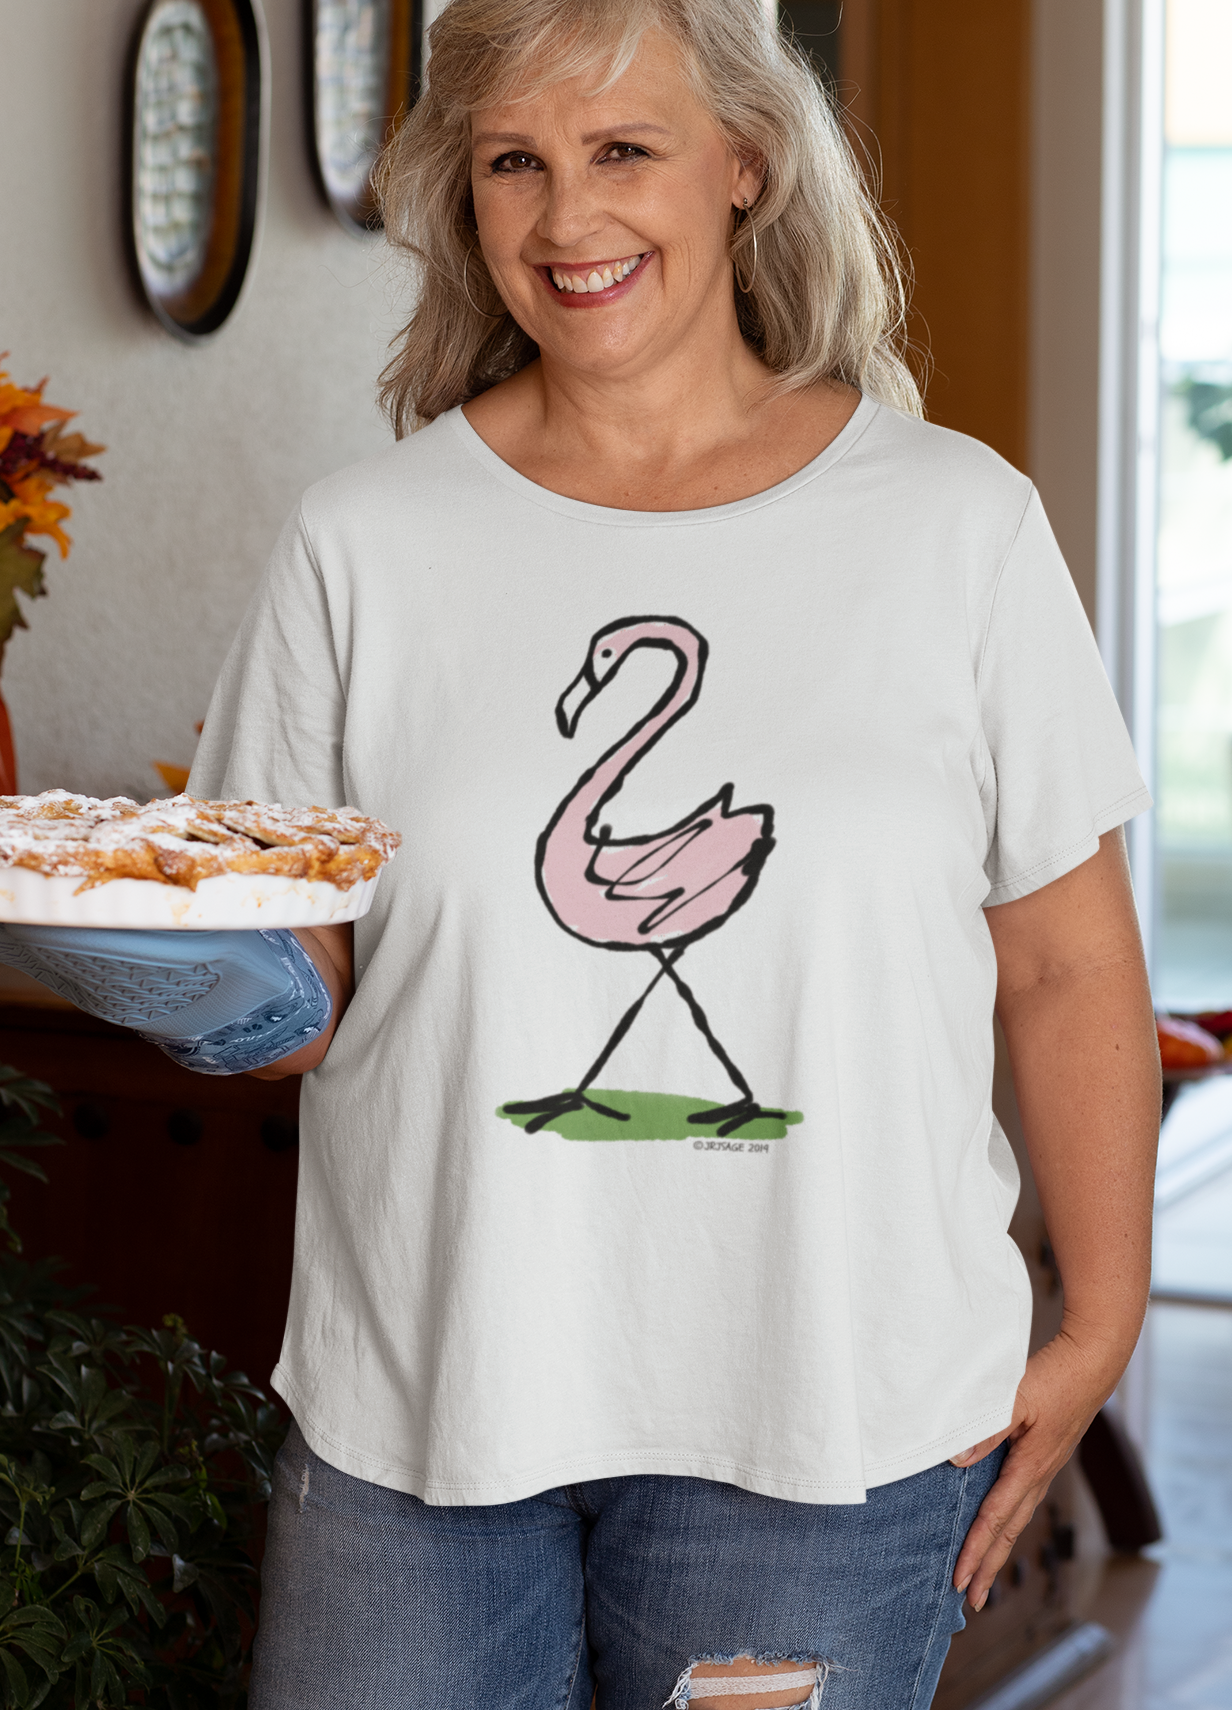 Pink Flamingo T-shirt - Woman wearing an illustrated flamingo t-shirt design on a white tee by Hector and Bone